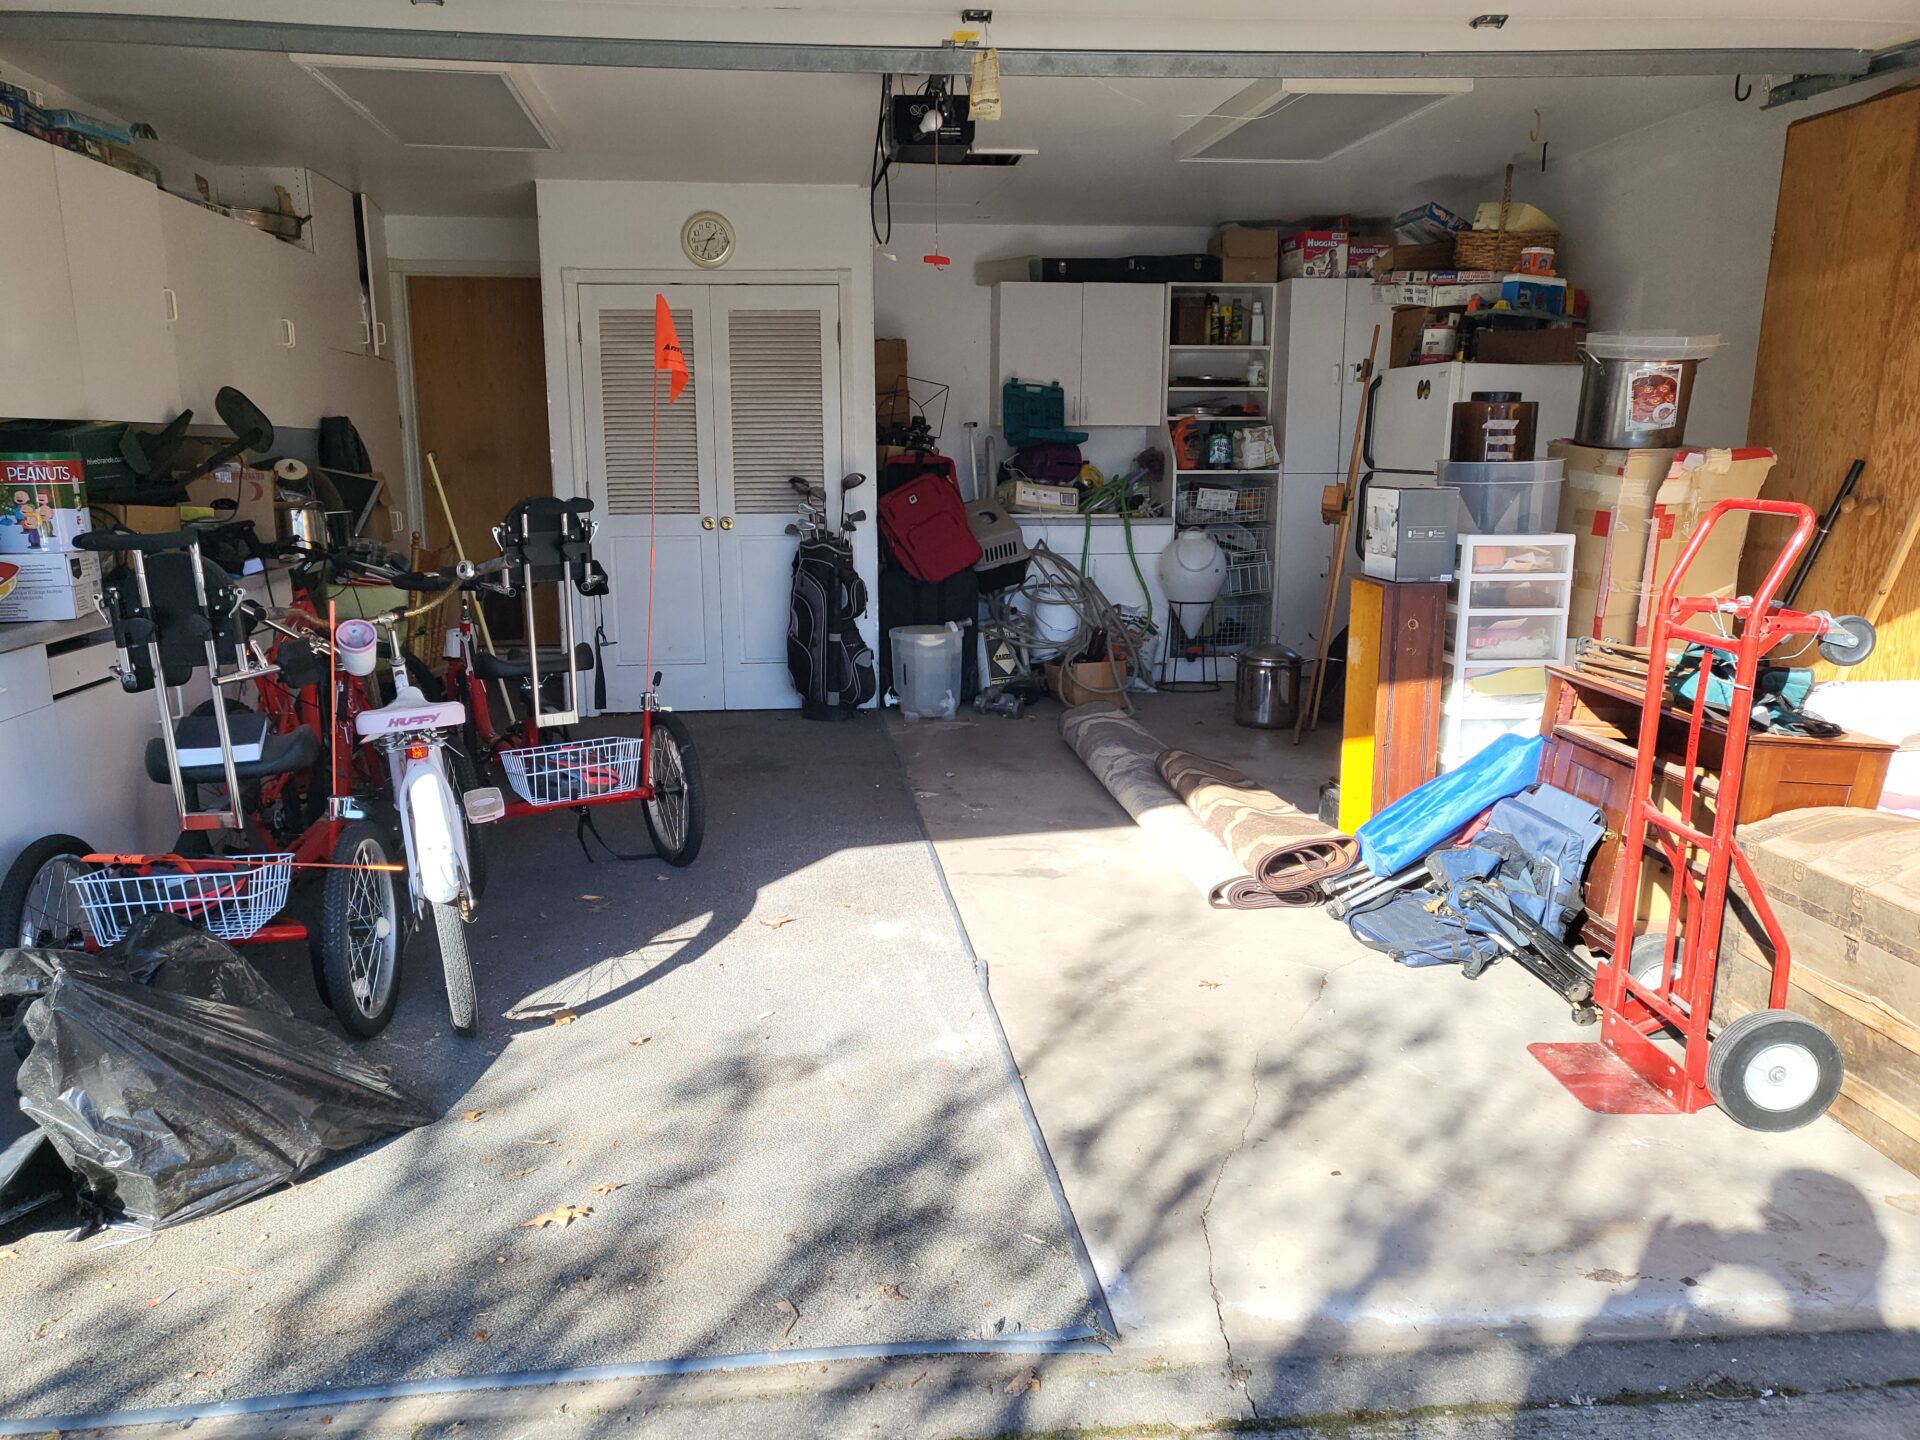 Garage with unwanted household items